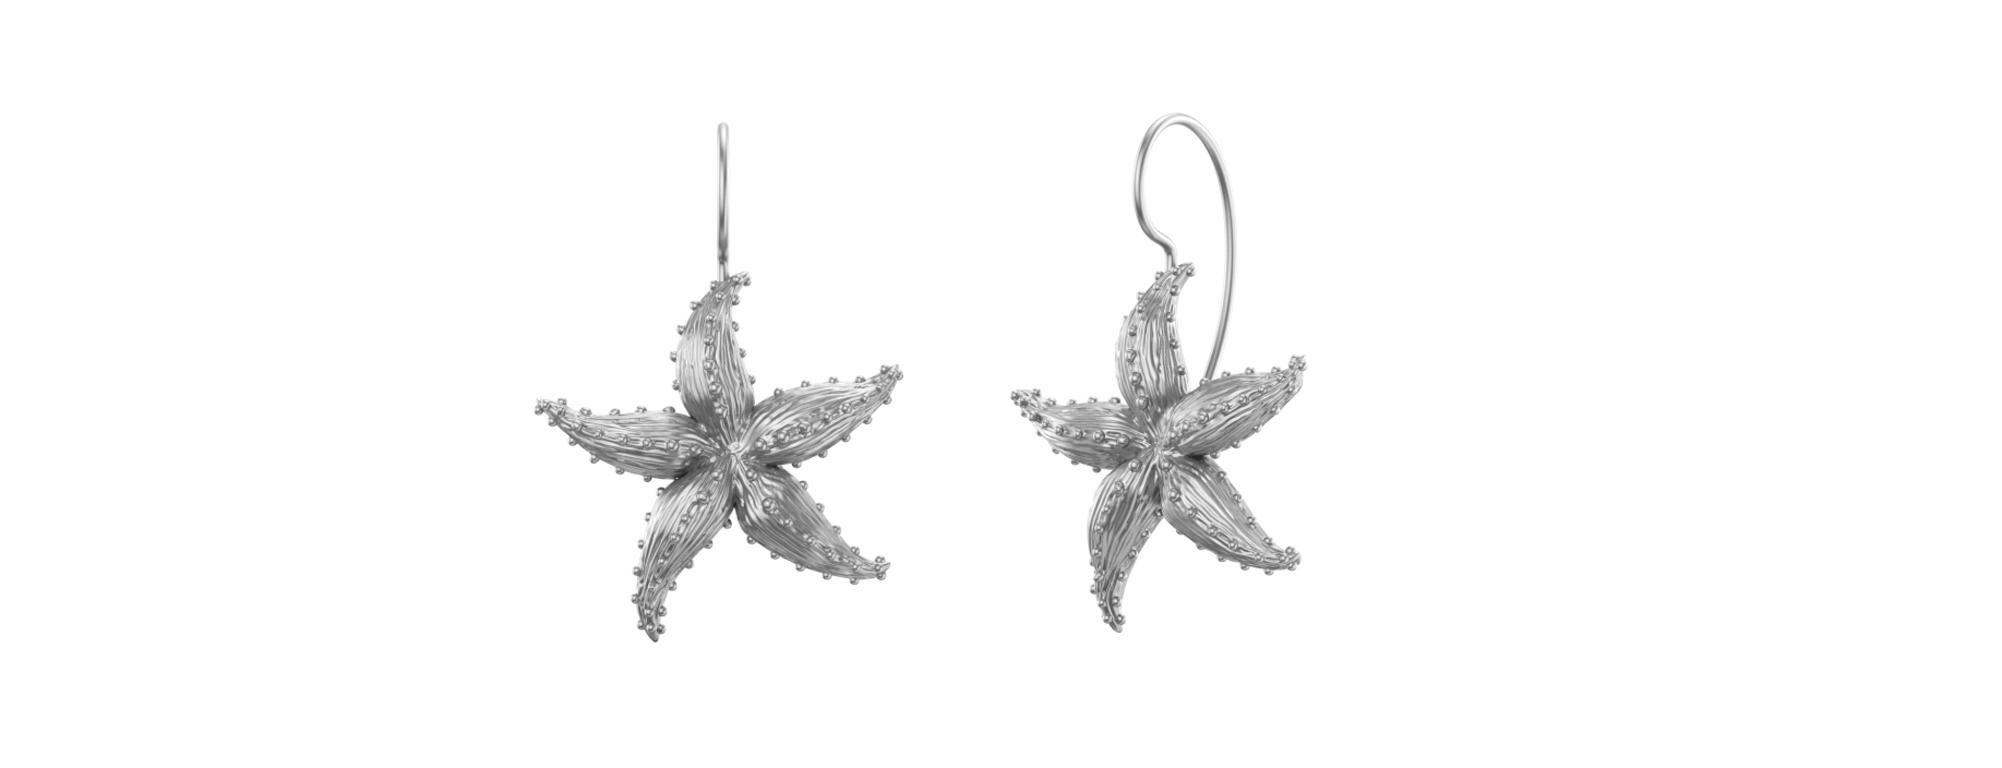 Starfish  Sterling silver  Earrings, The Ocean series.  Summer or winter depending where you live, for the beach lovers. Inspired from sea creatures, with their great shapes and colors. Matte finished. 
These stars are 25 mm tall plus the hook. 